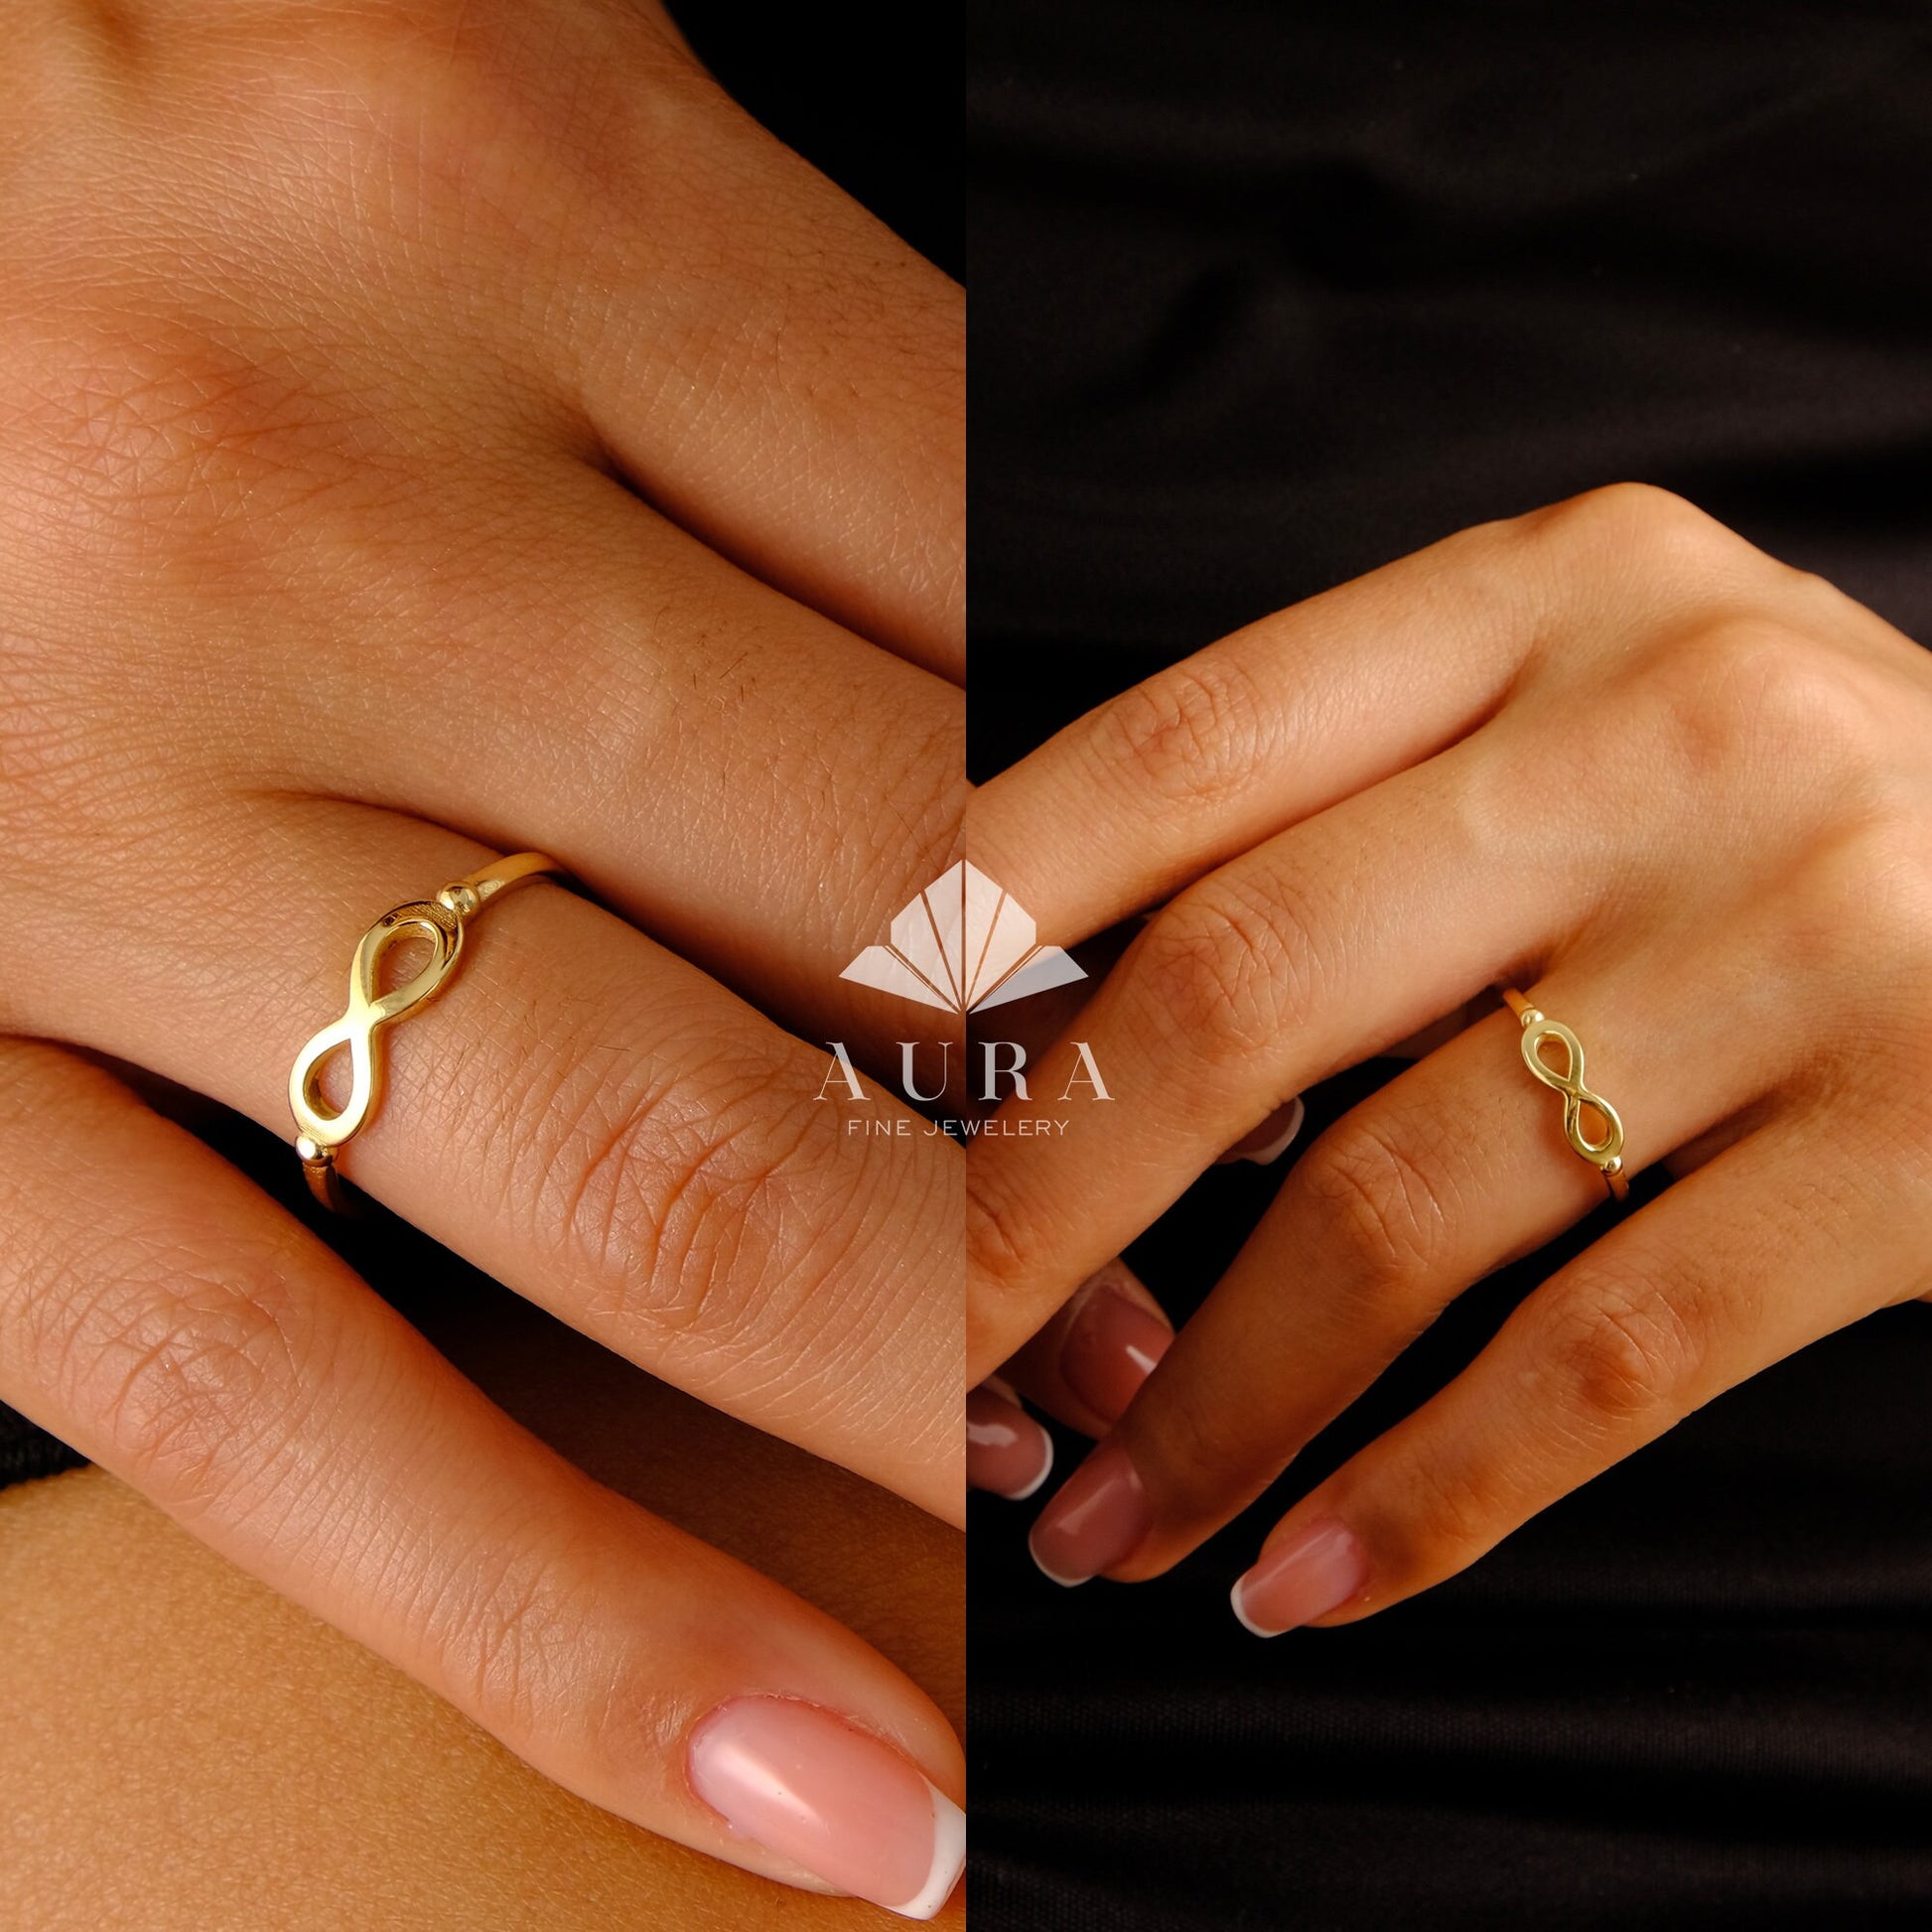 14K Gold Infinity Ring, Eternity Gold Band, Dainty Stacking Ring, Gold Knuckle Ring, Thumb Band, Forever Linked Together, Love Ring